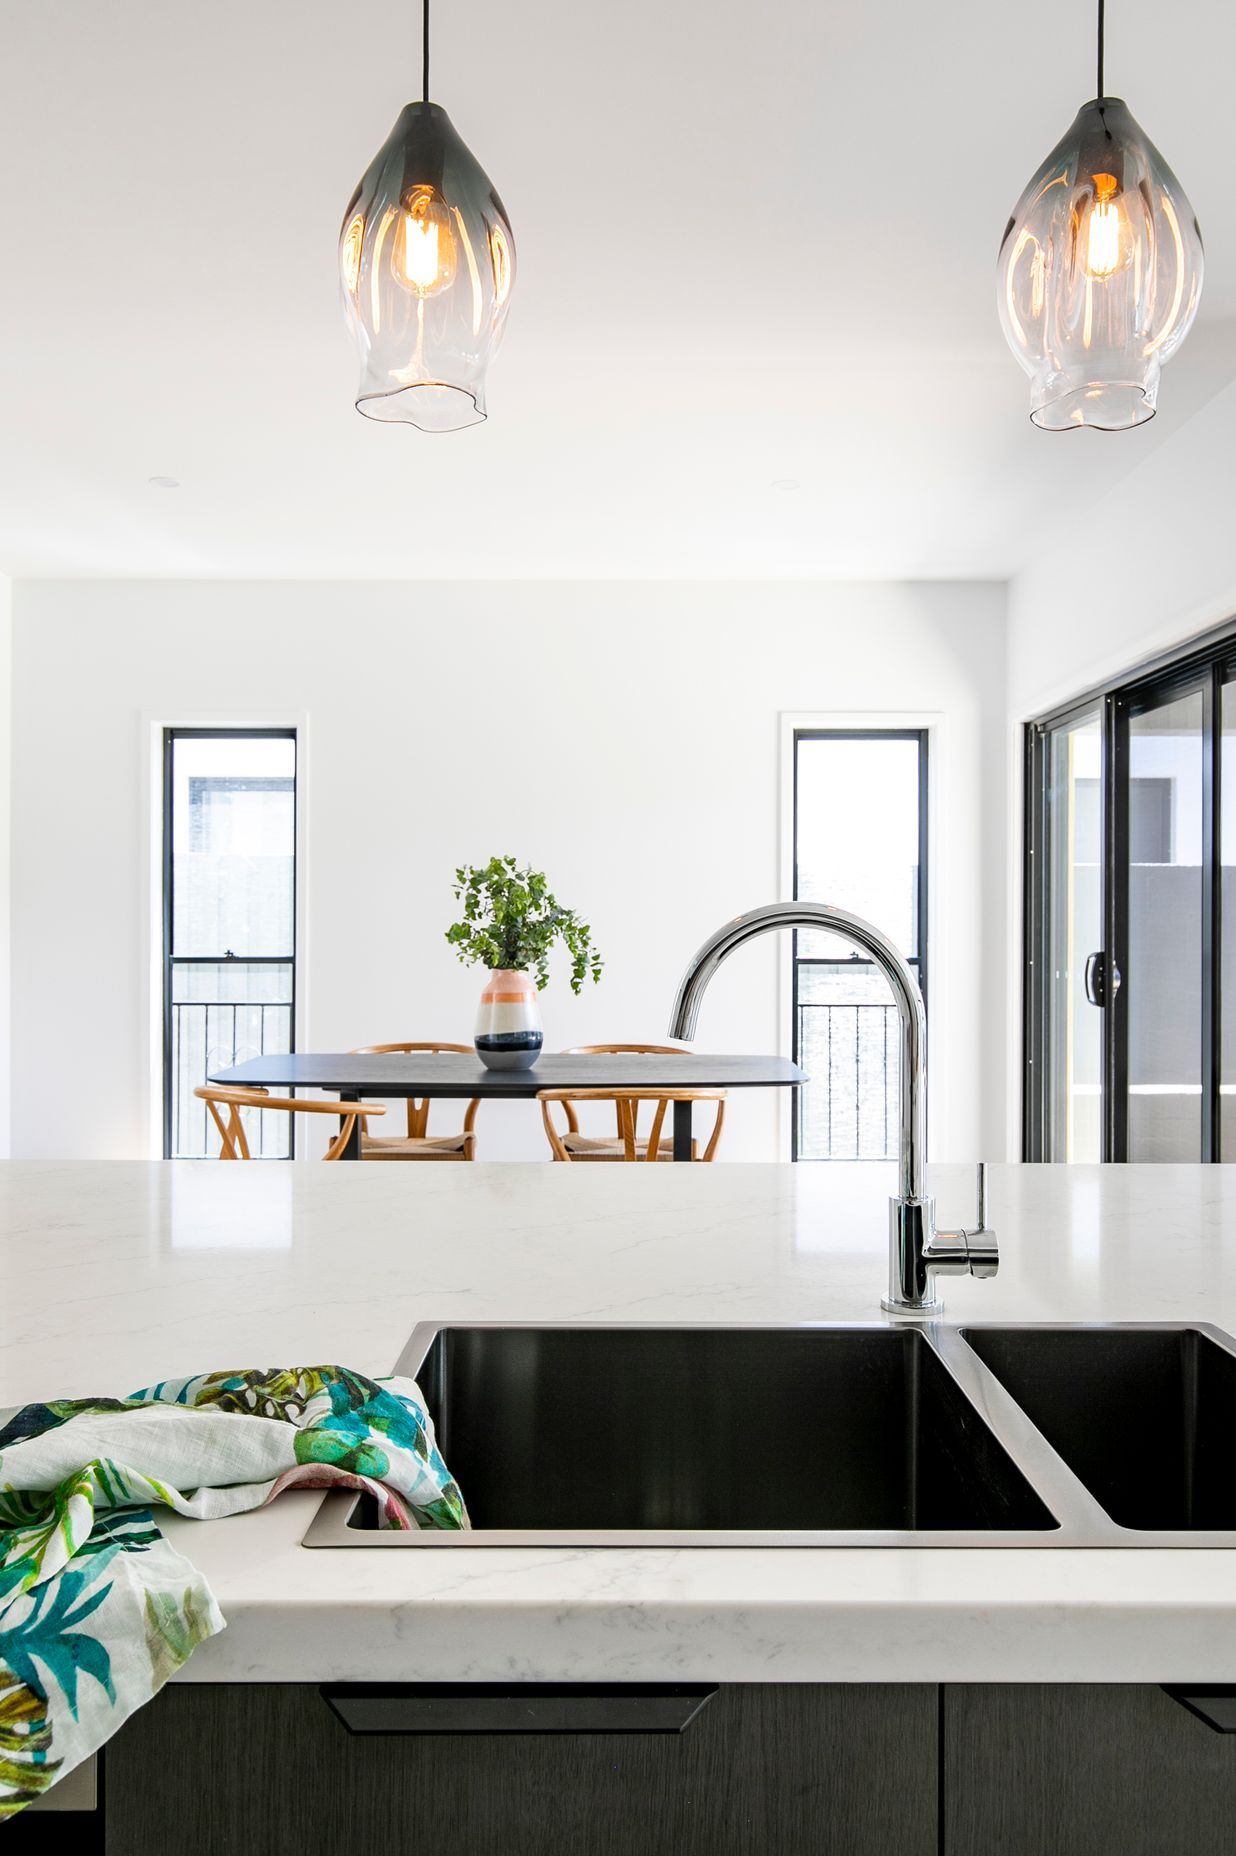 Photography: Rachael Lane | Clayfield Kitchen features our Polished Chrome Round Kitchen Mixer Tap (SKU: MK03-C) paired with a Lavello Brushed Nickel Kitchen Sink (SKU: MKSP-D670440-NK)